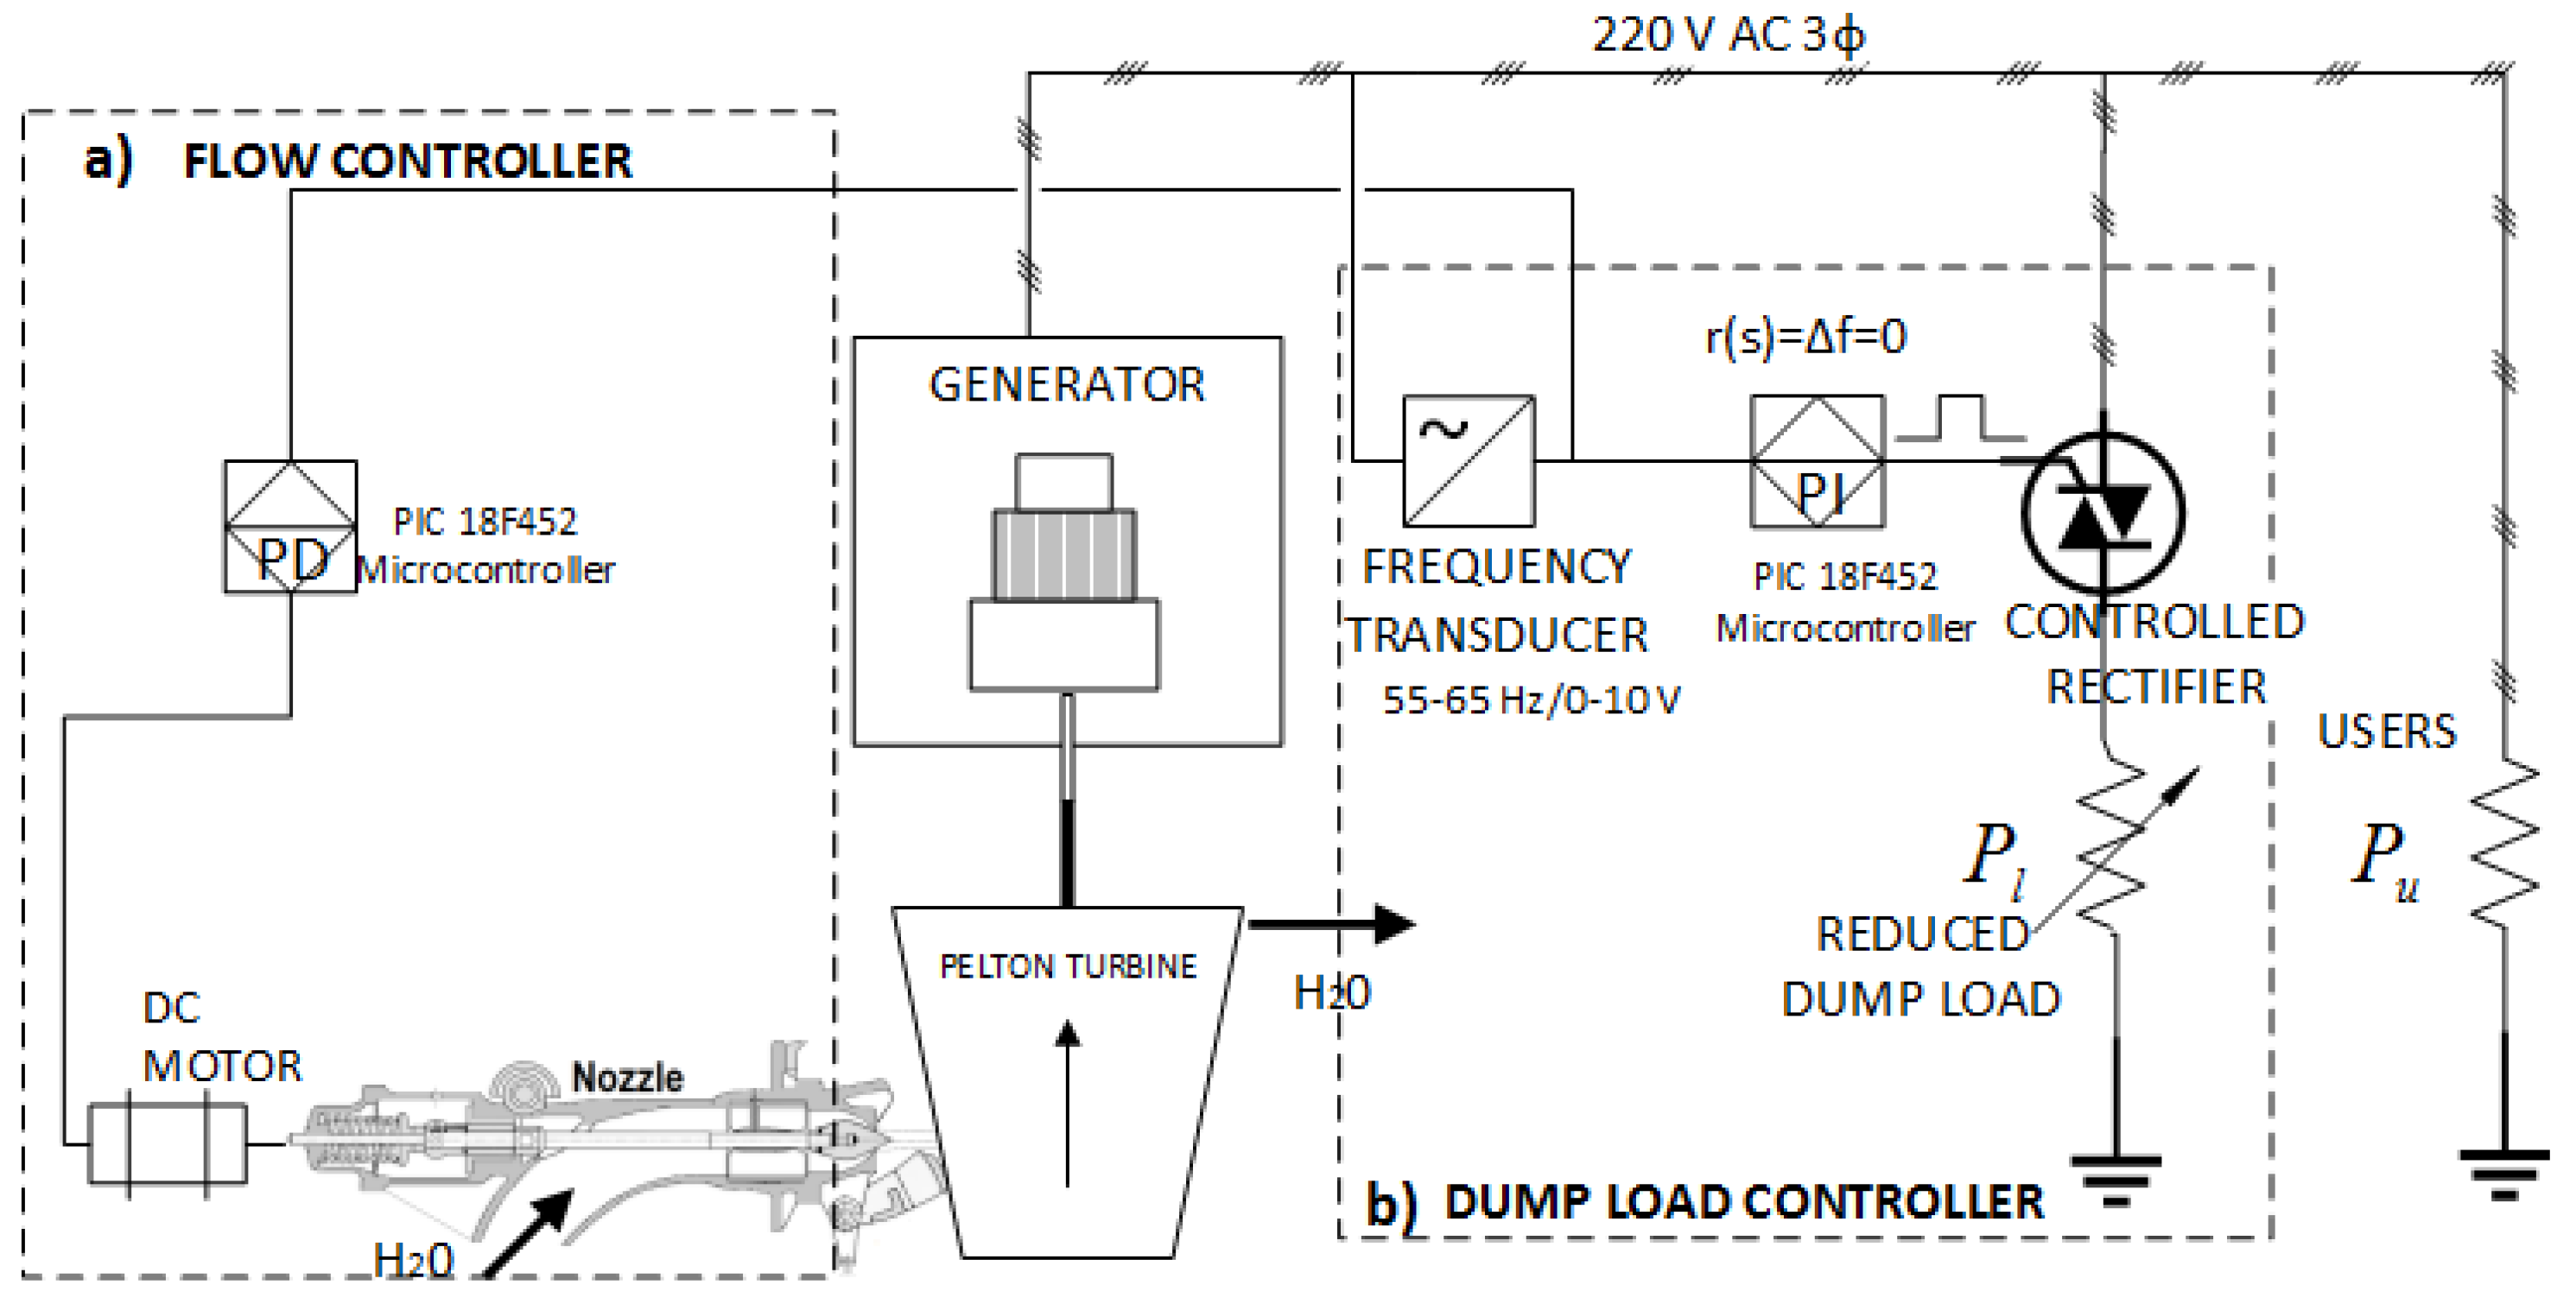 Energies | Free Full-Text | Combined Method of Flow-Reduced Dump Load for  Frequency Control of an Autonomous Micro-Hydropower in AC Microgrids | HTML